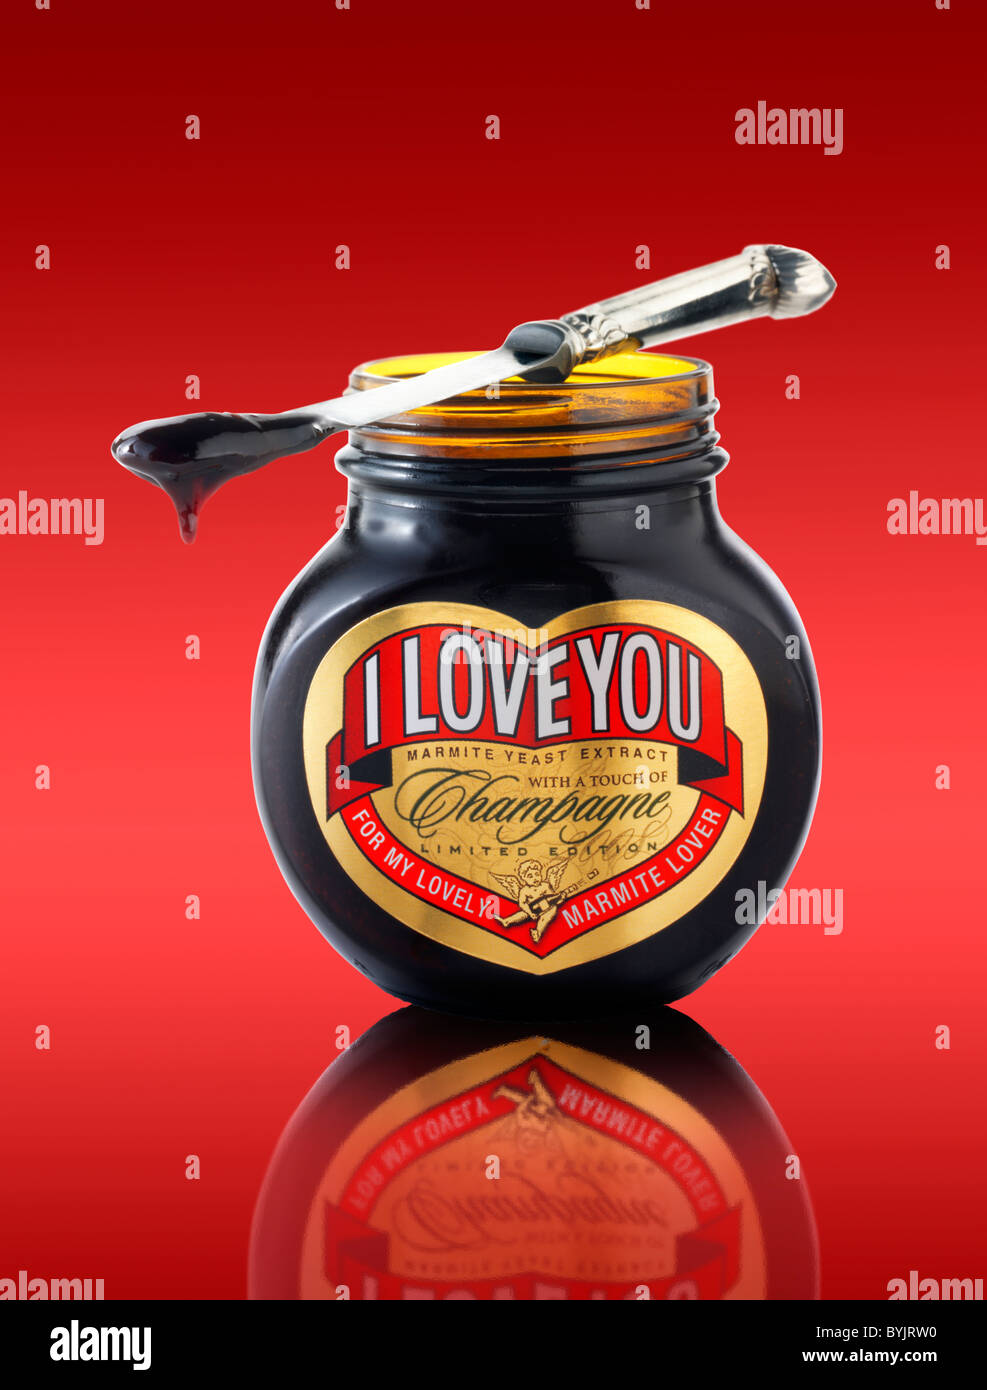 Jar of traditional Marmite with 'I Love You' on label Stock Photo